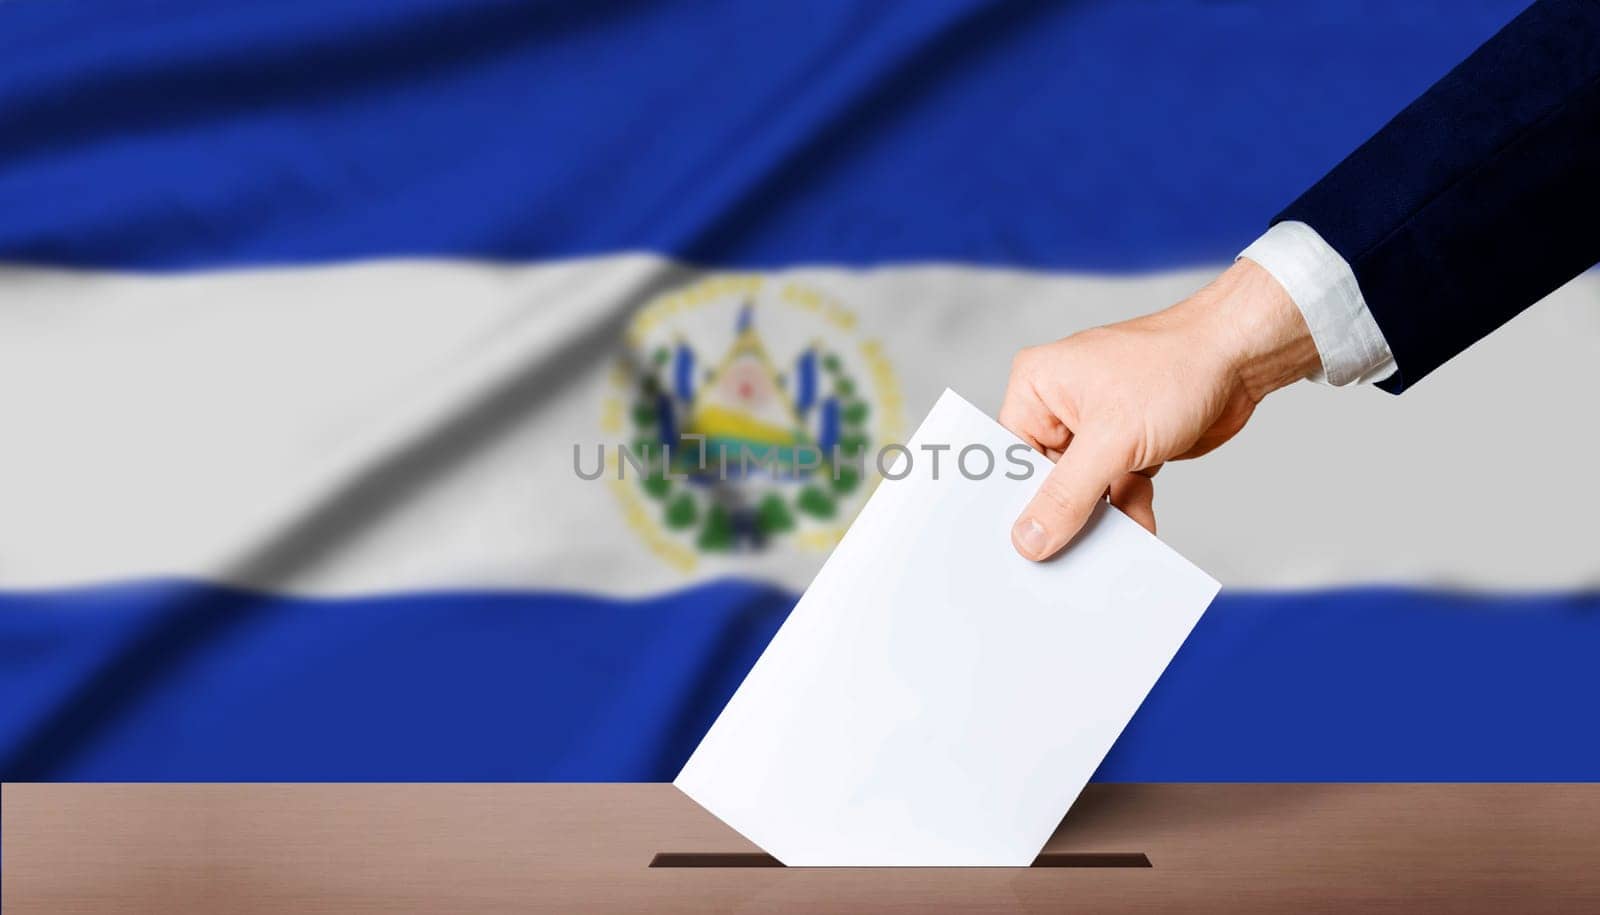 Hand holding ballot in voting ballot box with El Salvador flag in background. El Salvador presidential elections concept by isaiphoto